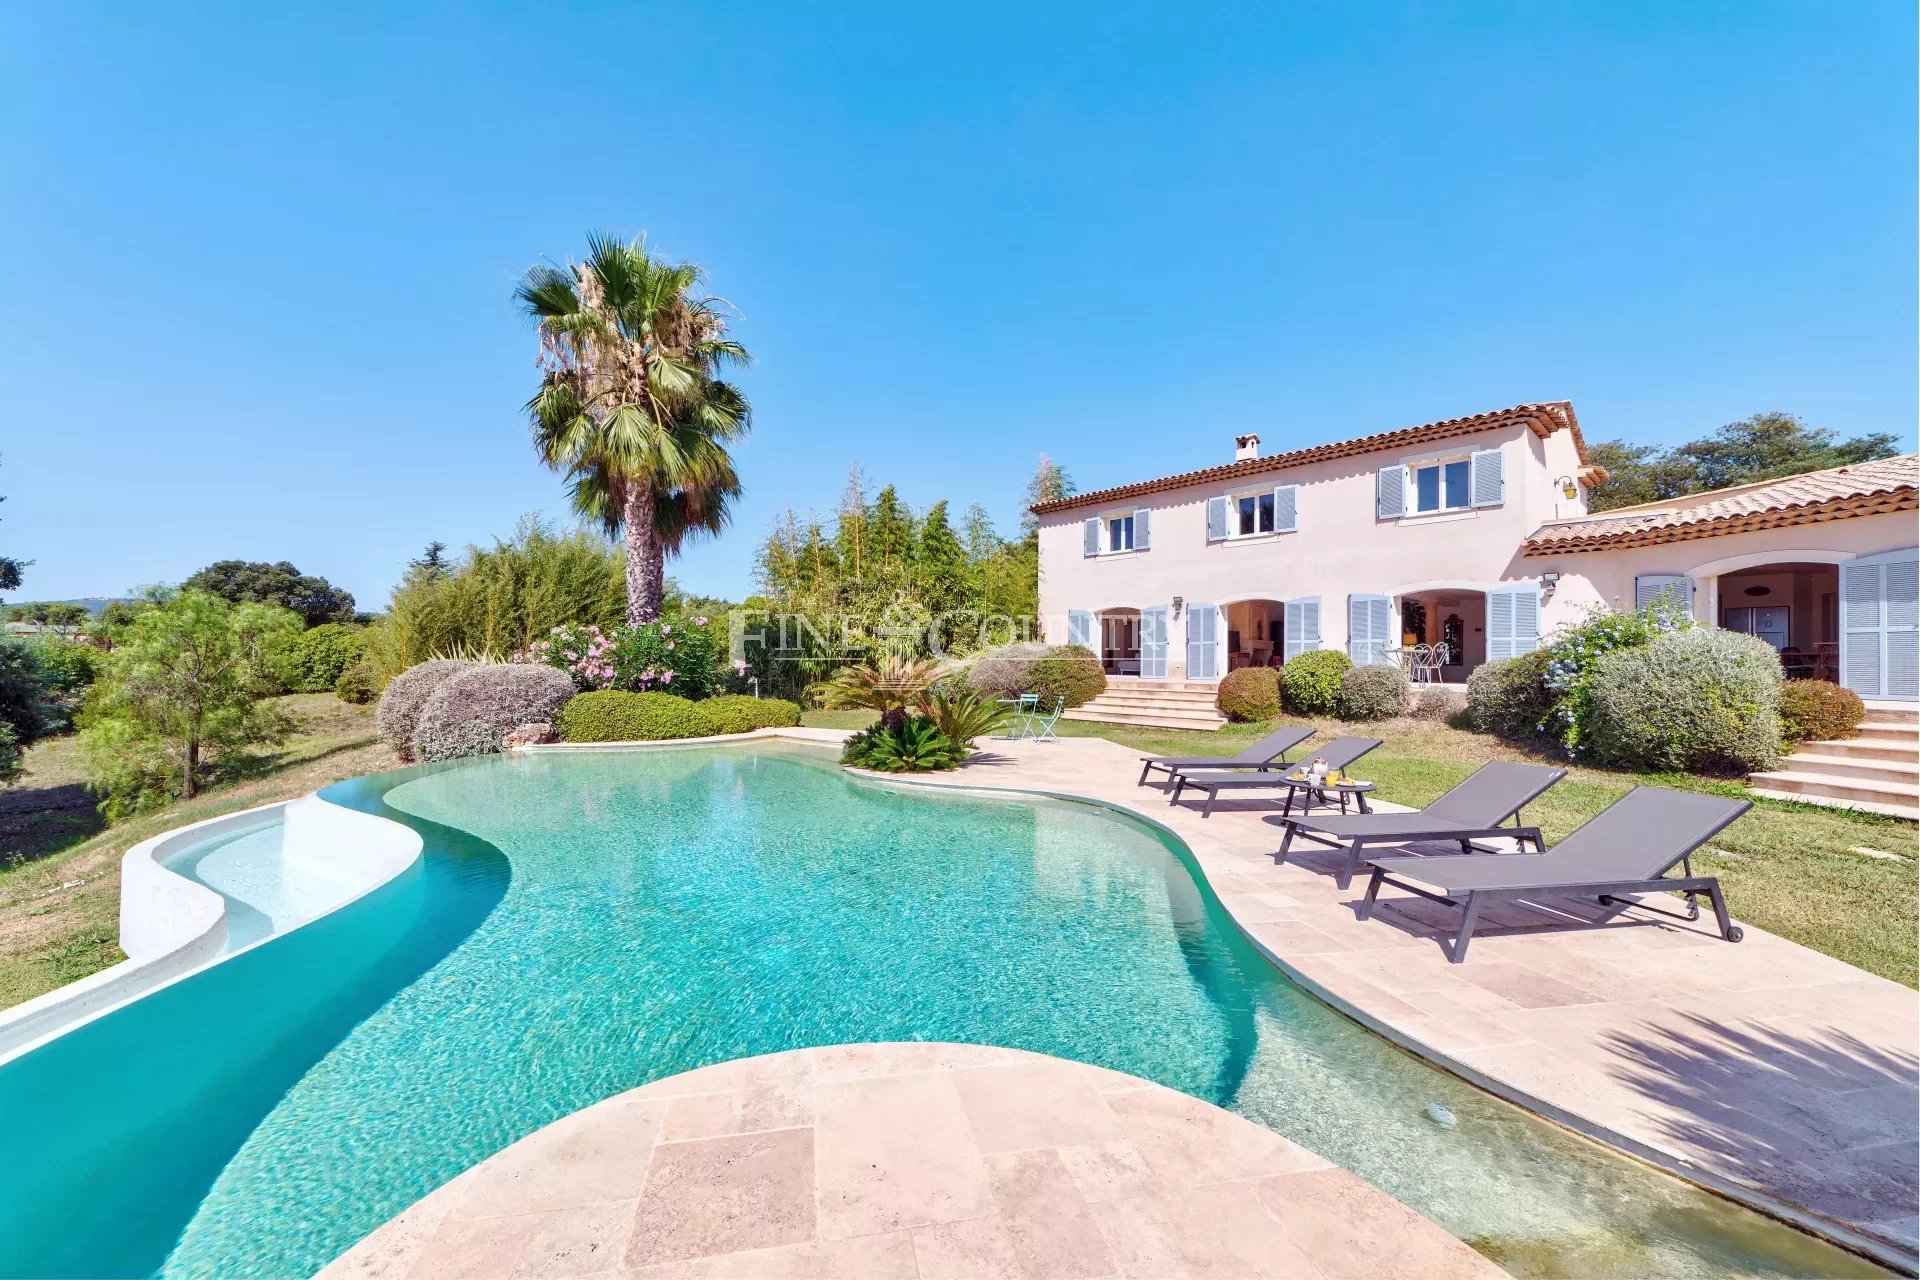 for sale Villa near Mougins with a free-form pool and panoramic views